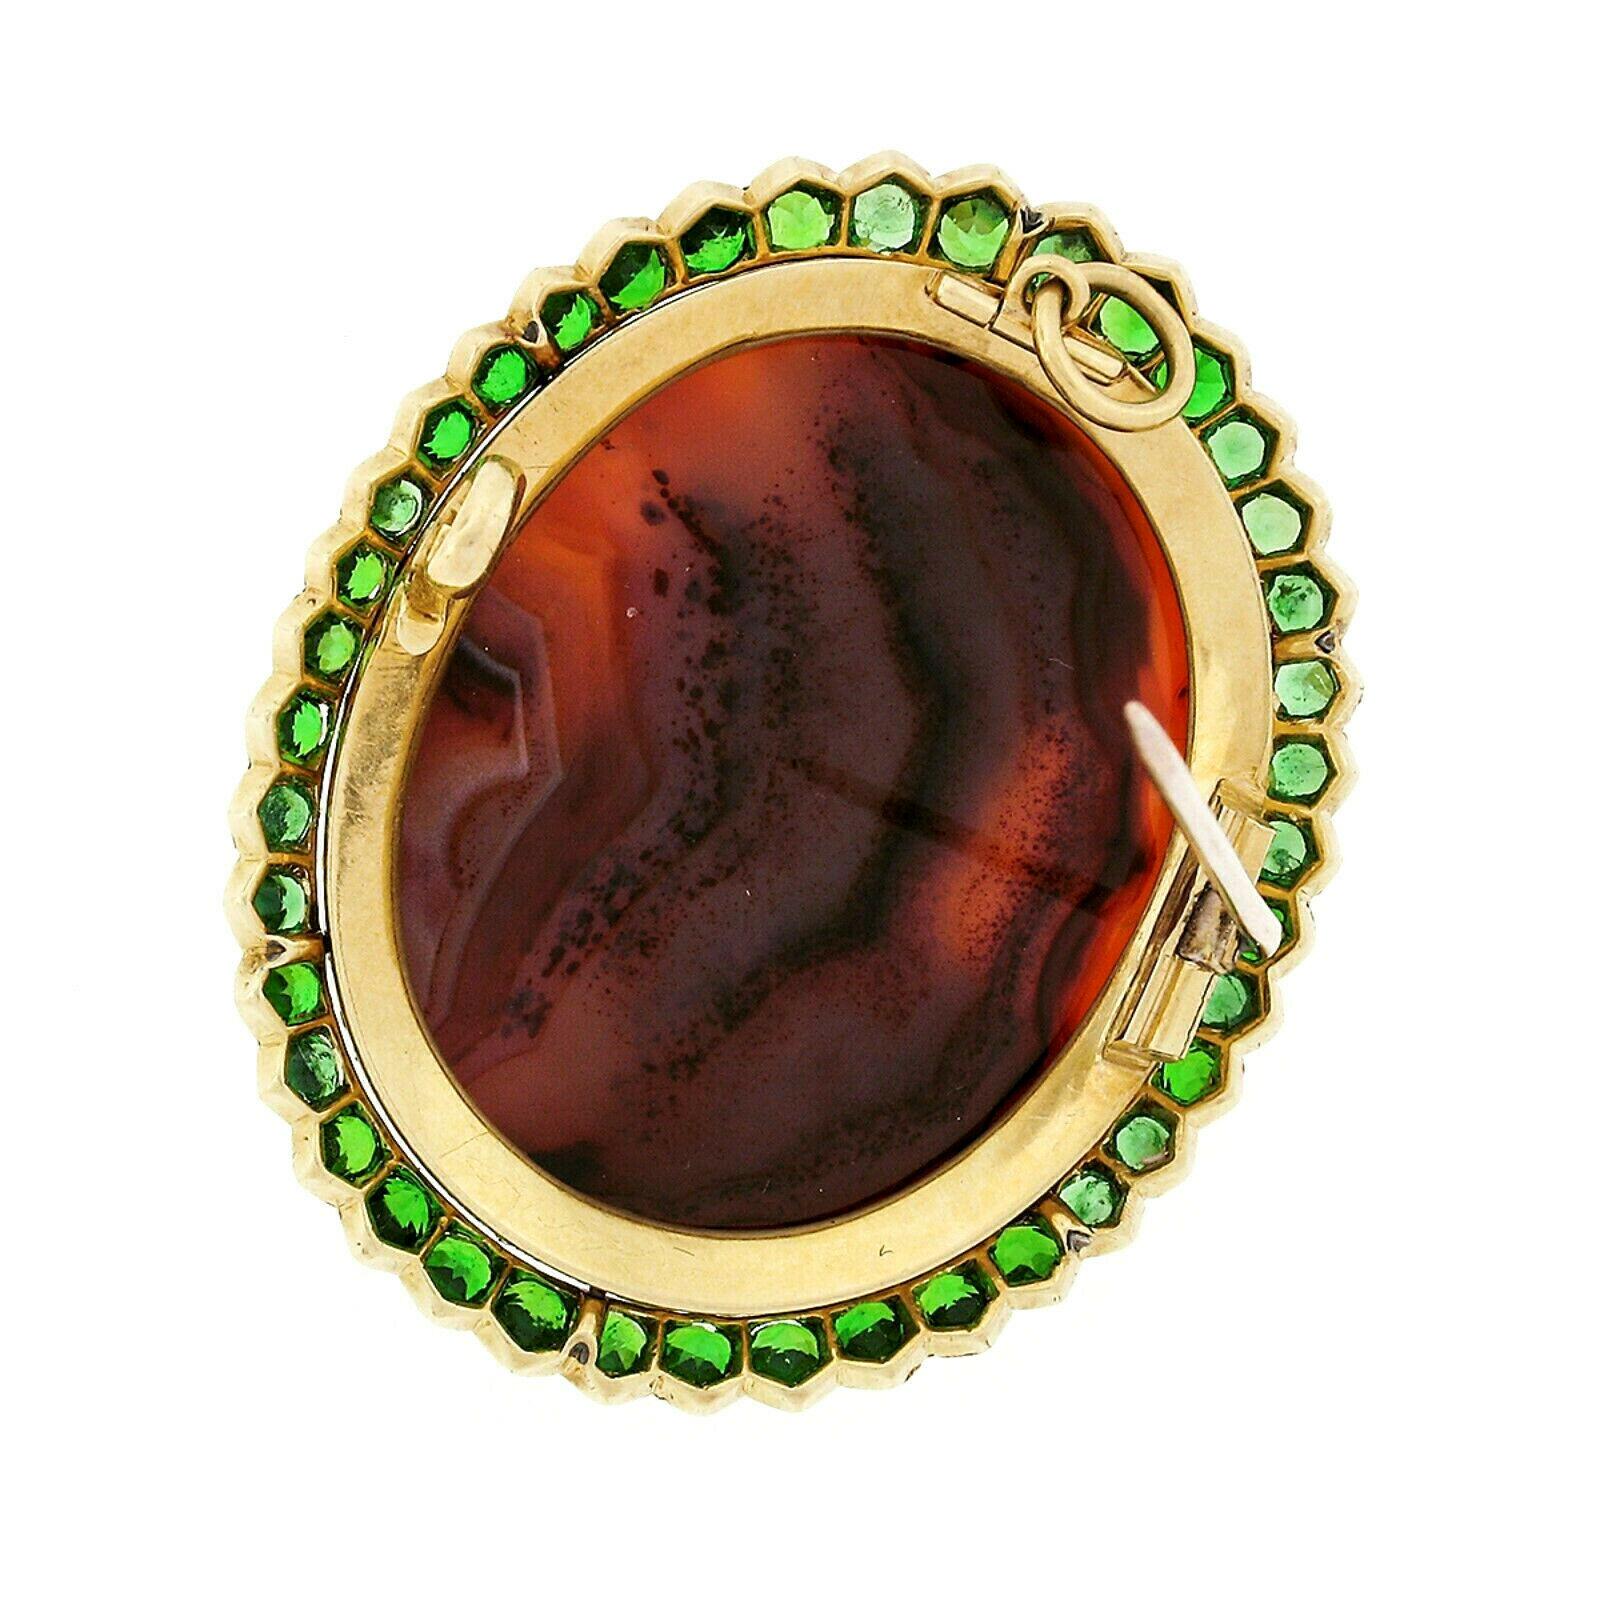 Large 18 Karat Gold Carved Agate Male Cameo Brooch Pendant with Tsavorite Halo 1